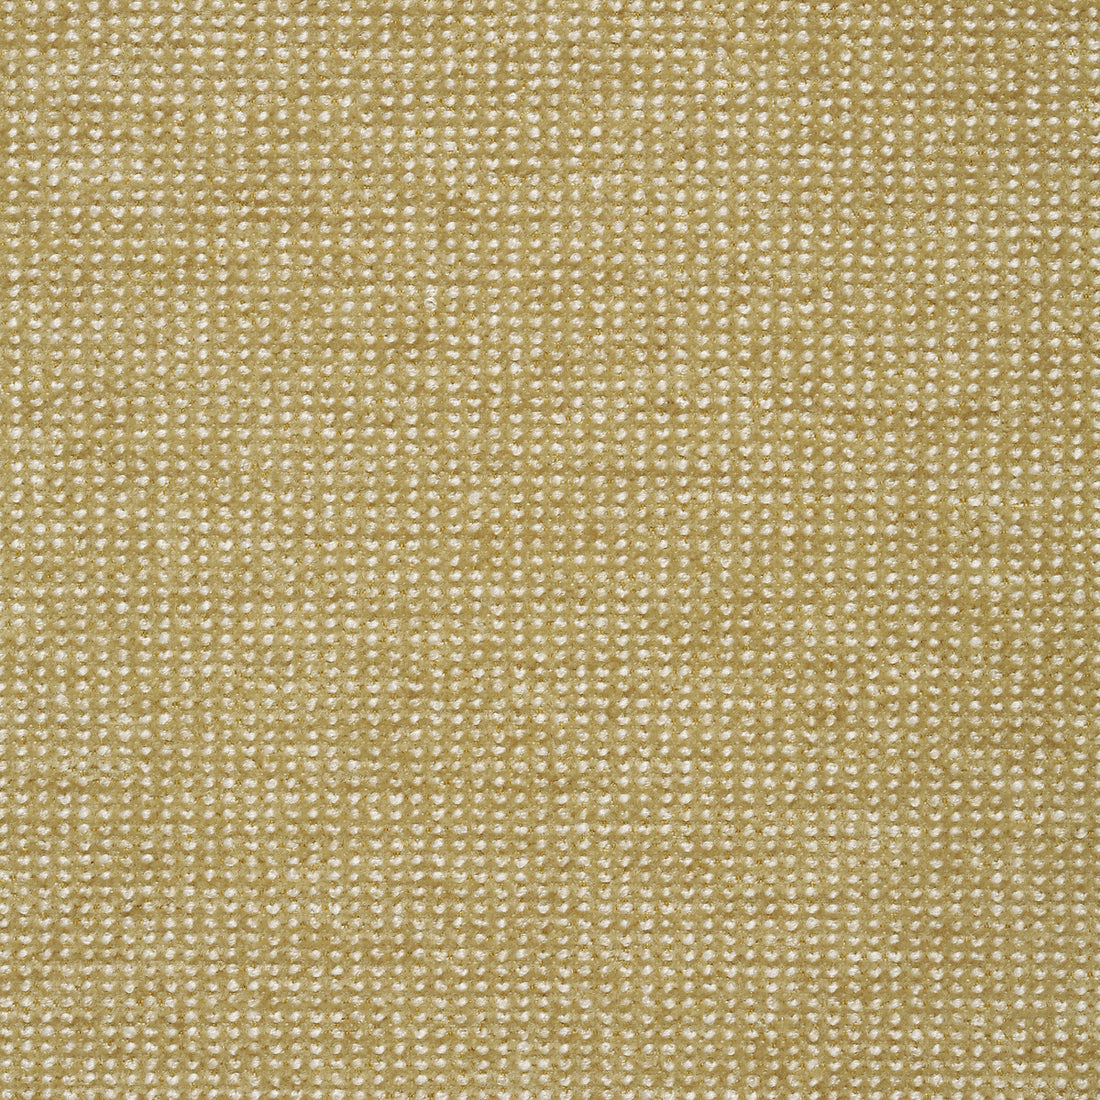 Kravet Smart fabric in 35115-14 color - pattern 35115.14.0 - by Kravet Smart in the Crypton Home collection